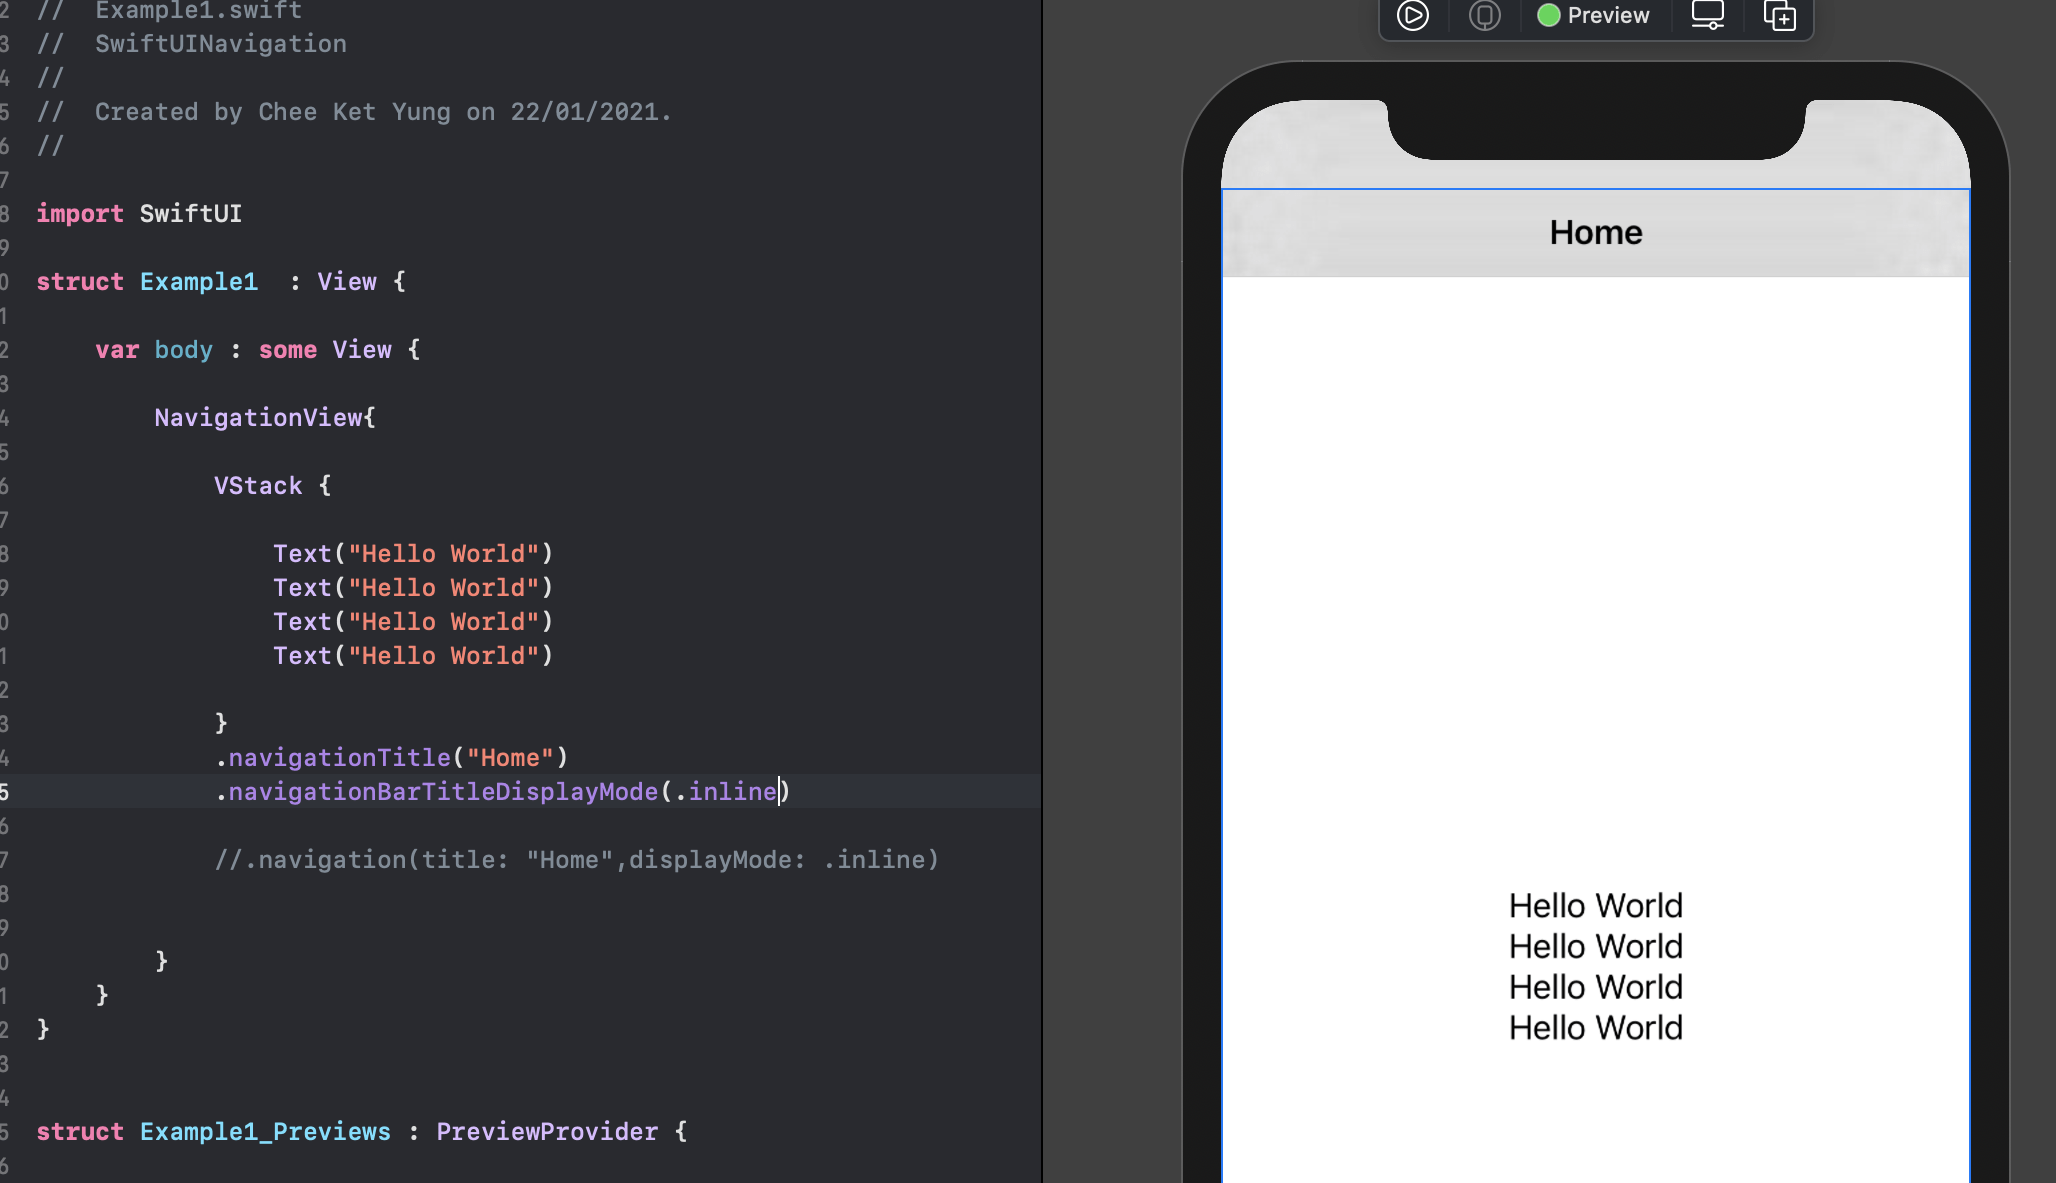 How to hide a Navigation Back button in SwiftUI